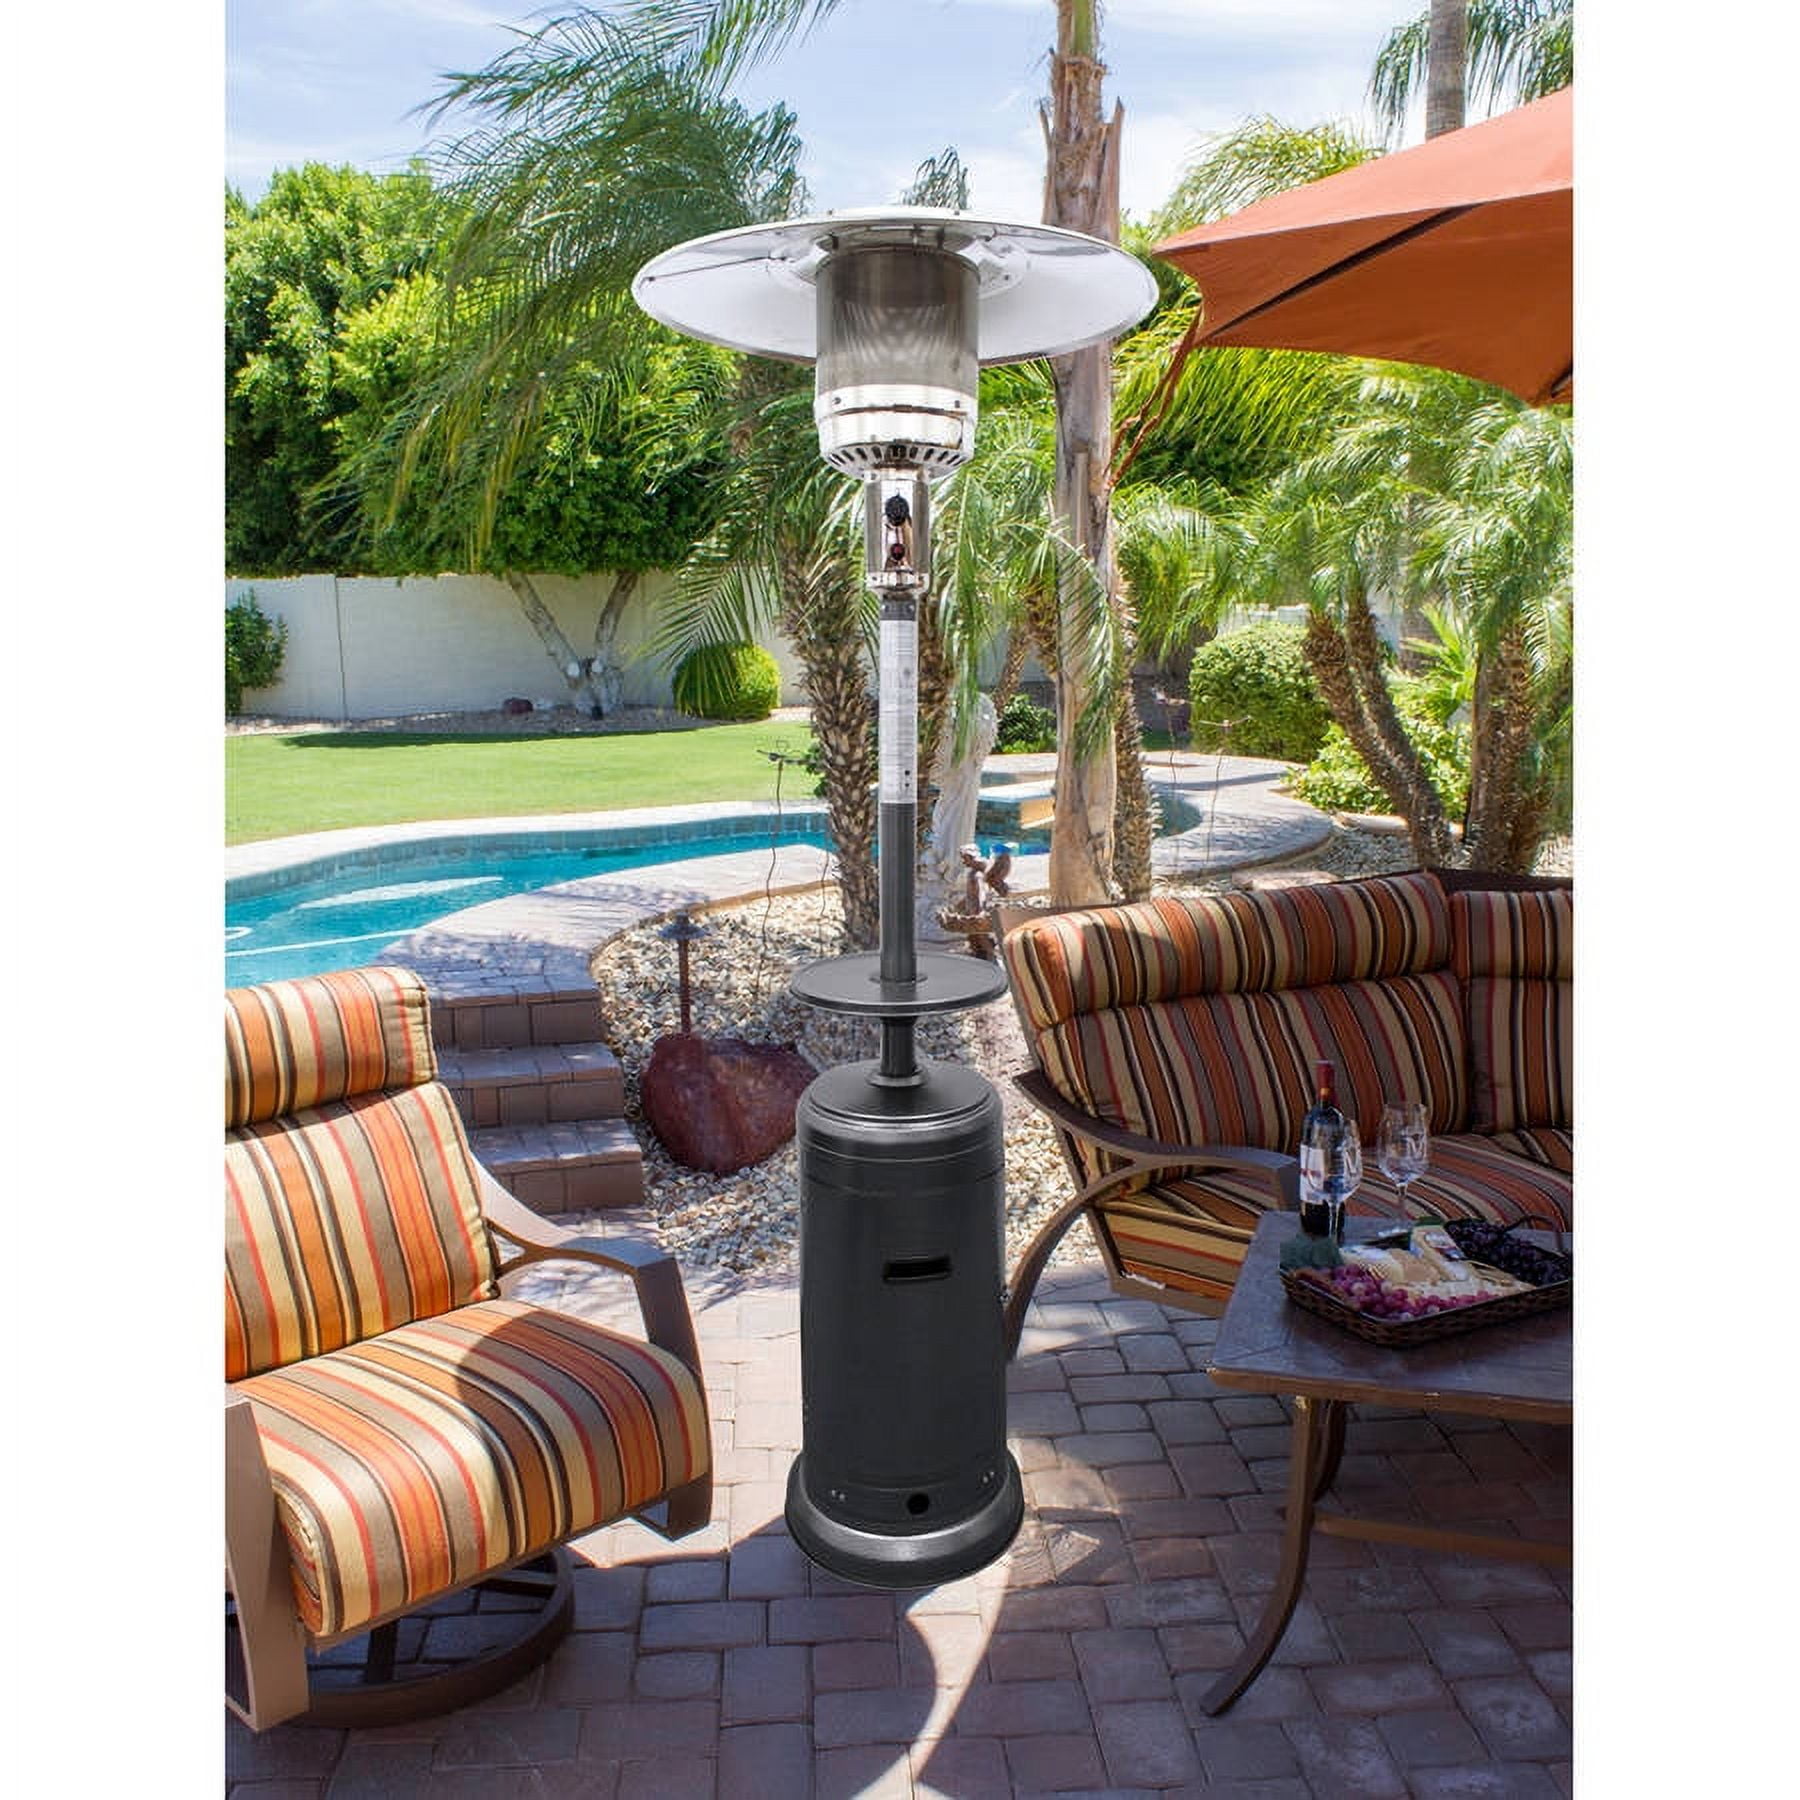 Hlds01-w-cb 87 In. Tall Hammered Silver Patio Heater